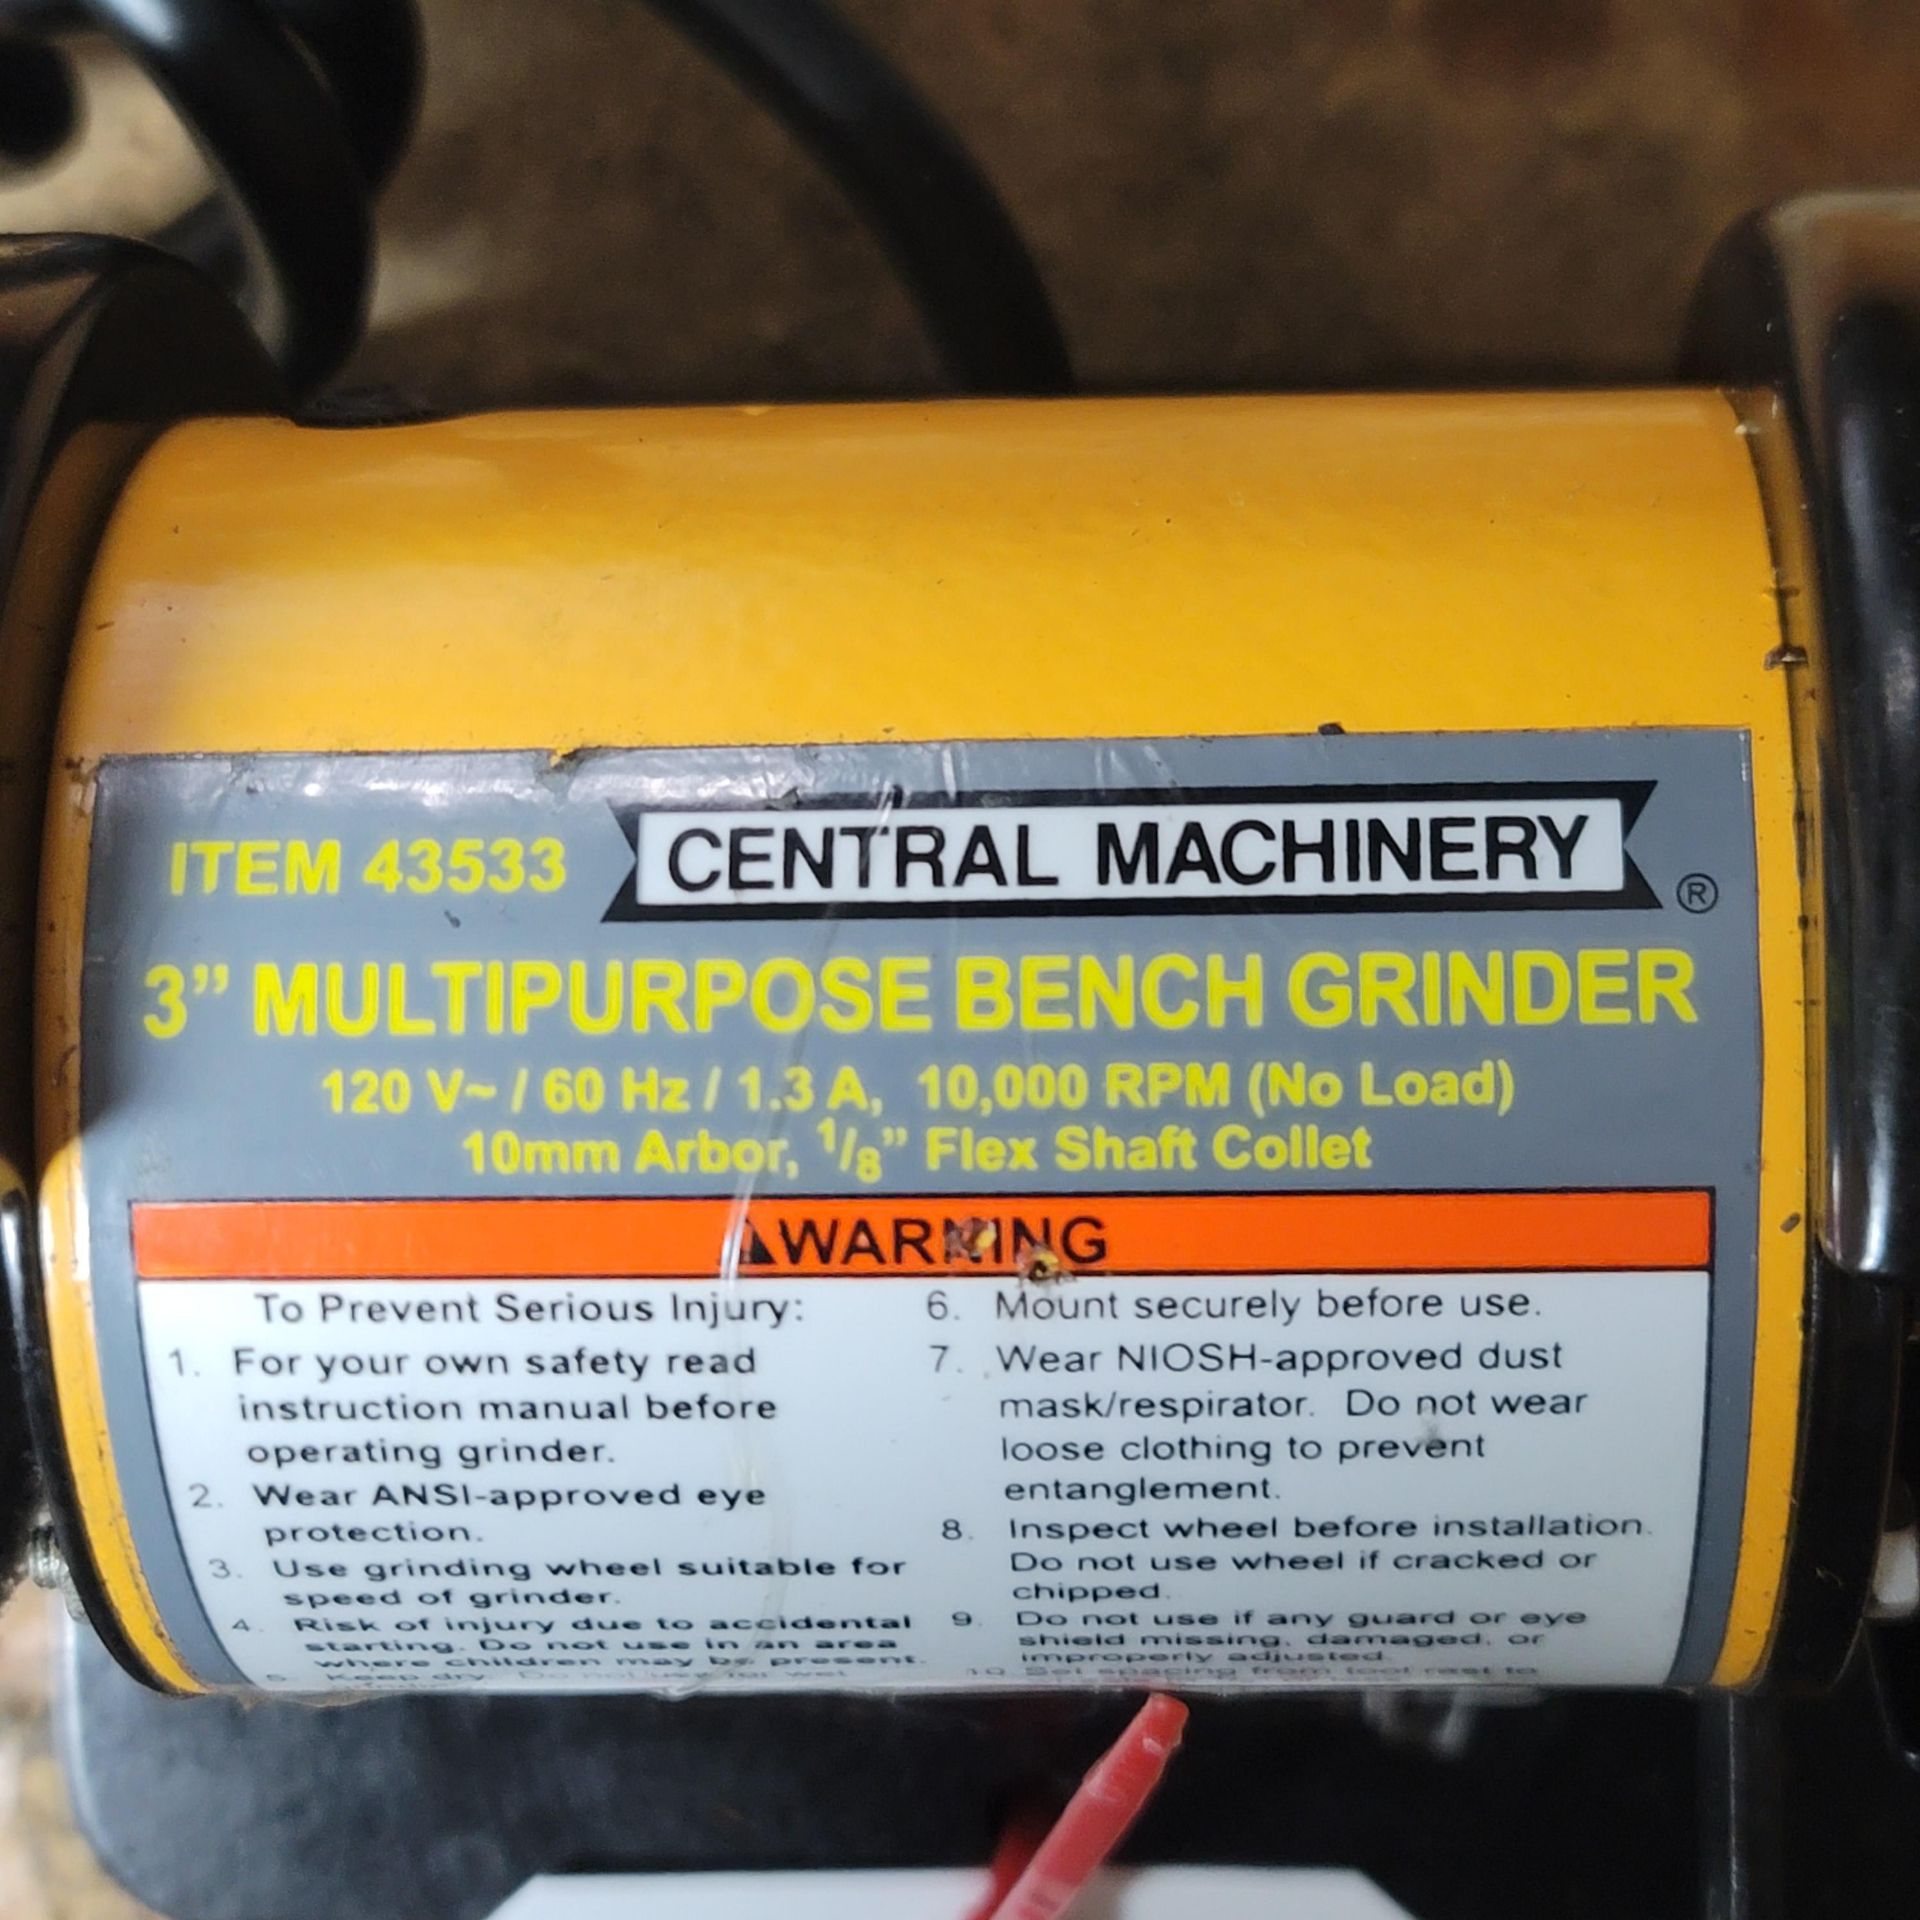 CENTRAL MACHINERY 3" MULTIPURPOSE BENCH GRINDER, ITEM 43533 - Image 2 of 2